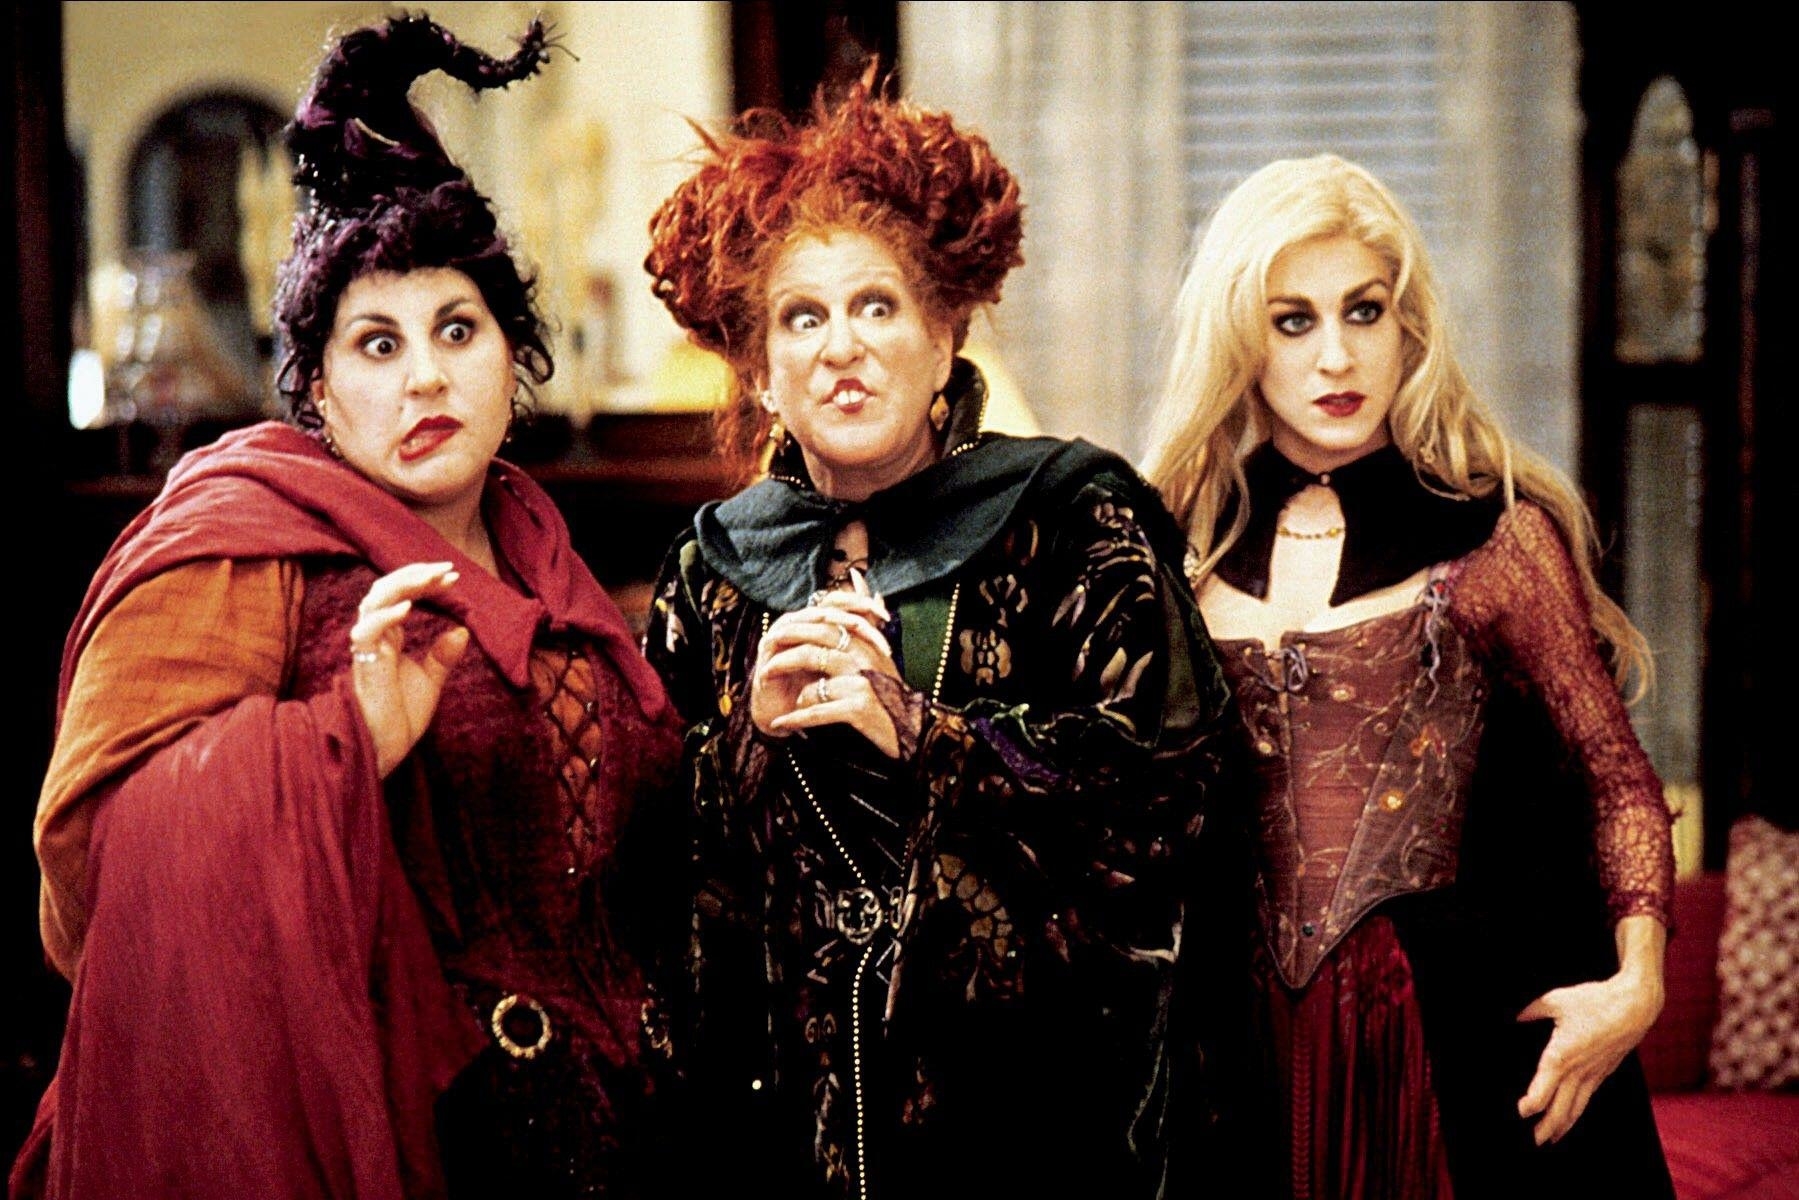 Kathy Najimy, Bette Midler, and Sarah Jessica Parker dressed as witches in Hocus Pocus